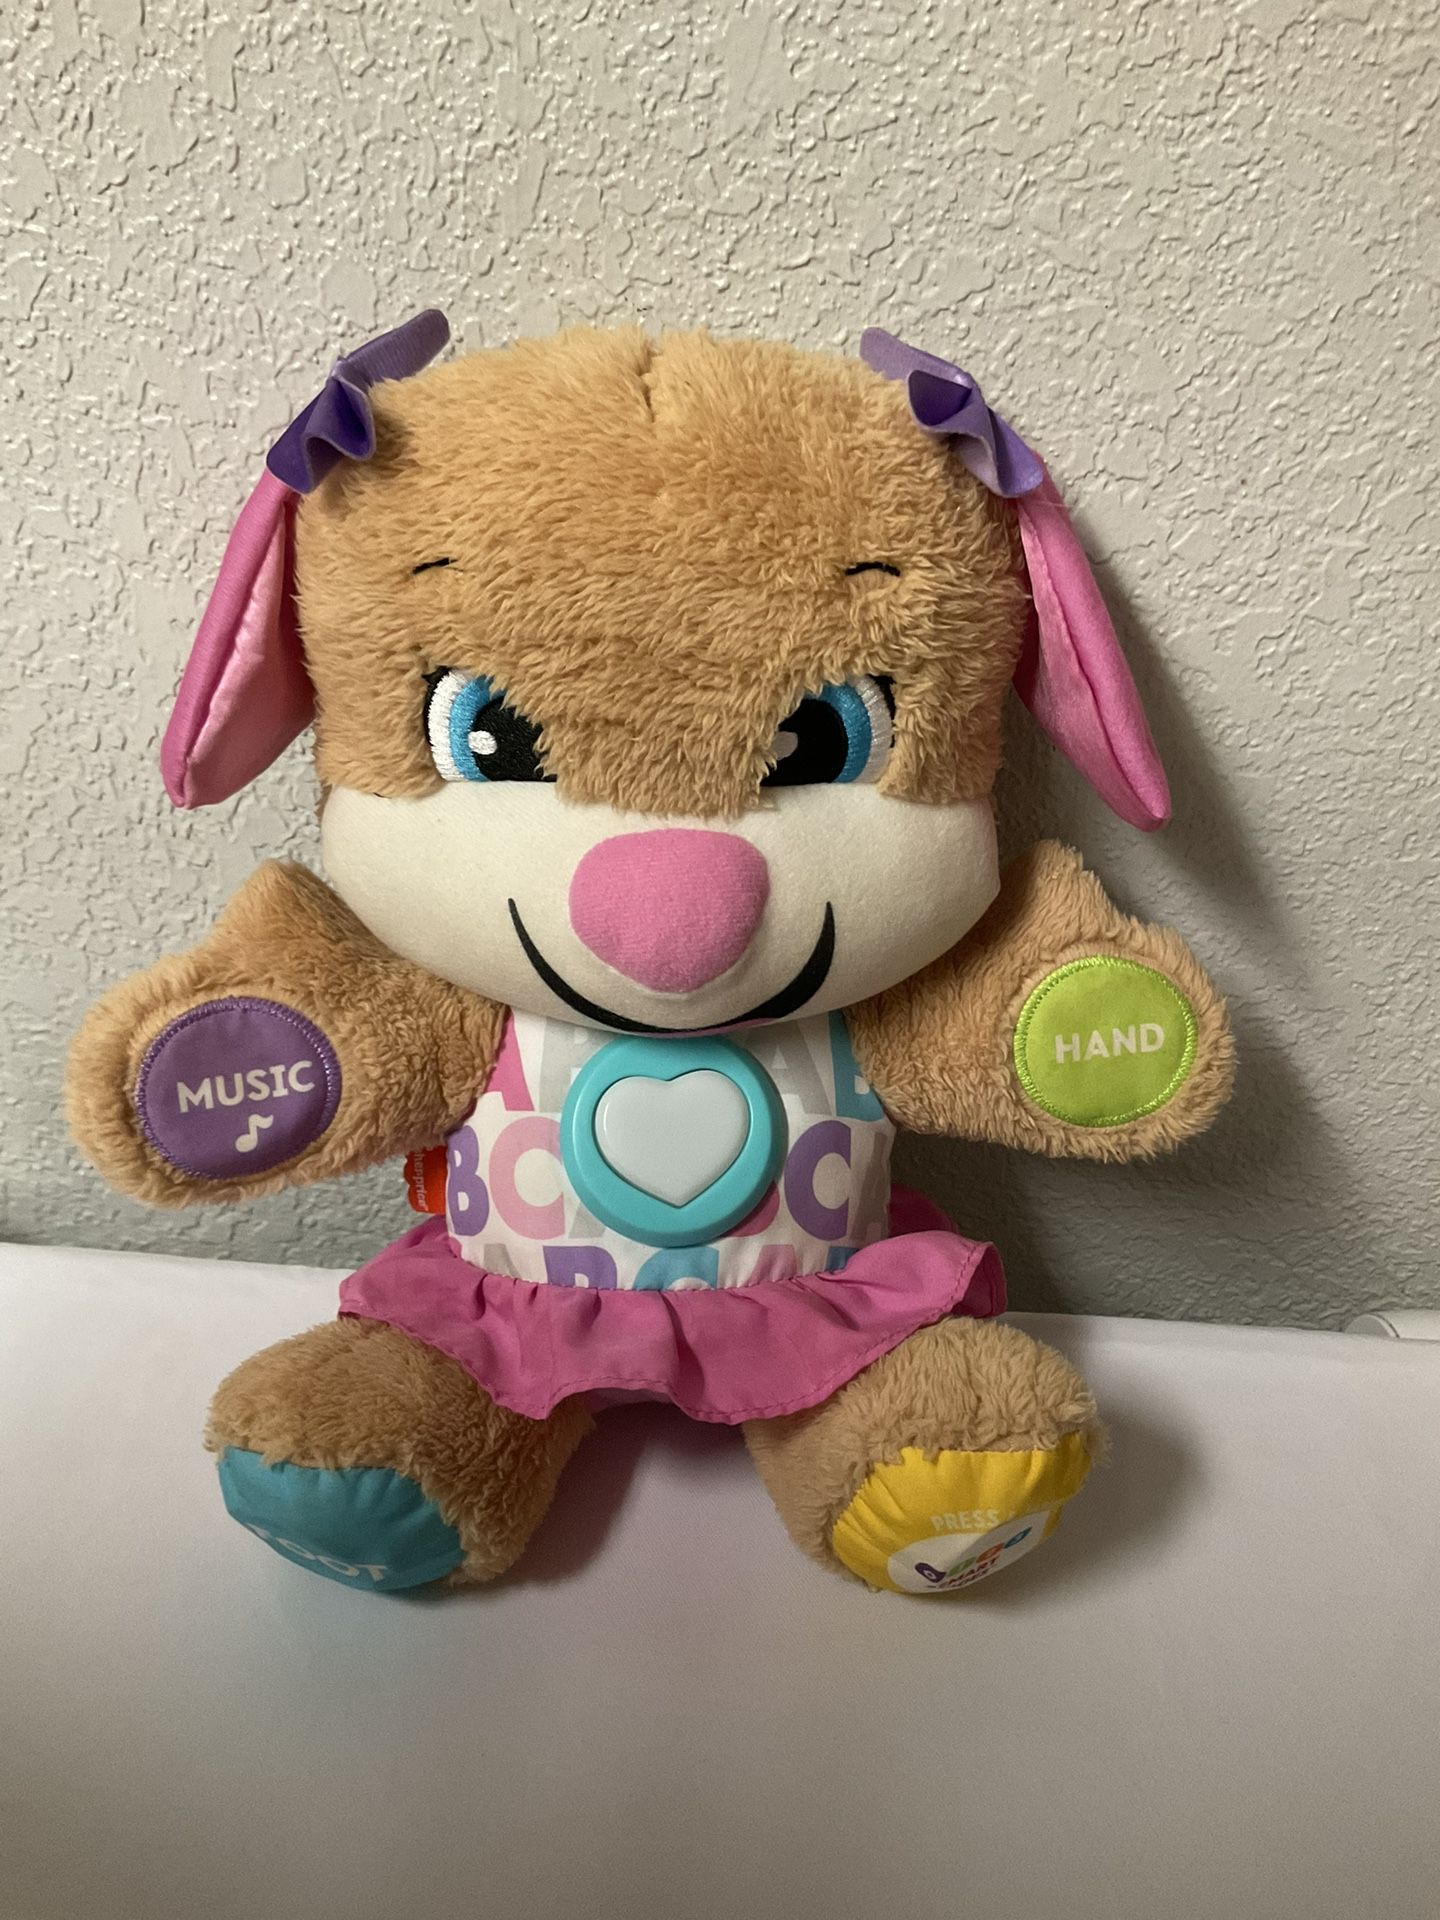 Fischer Price Laugh And Learn Smart Stages Puppy Educational Toy For Girls Kids.